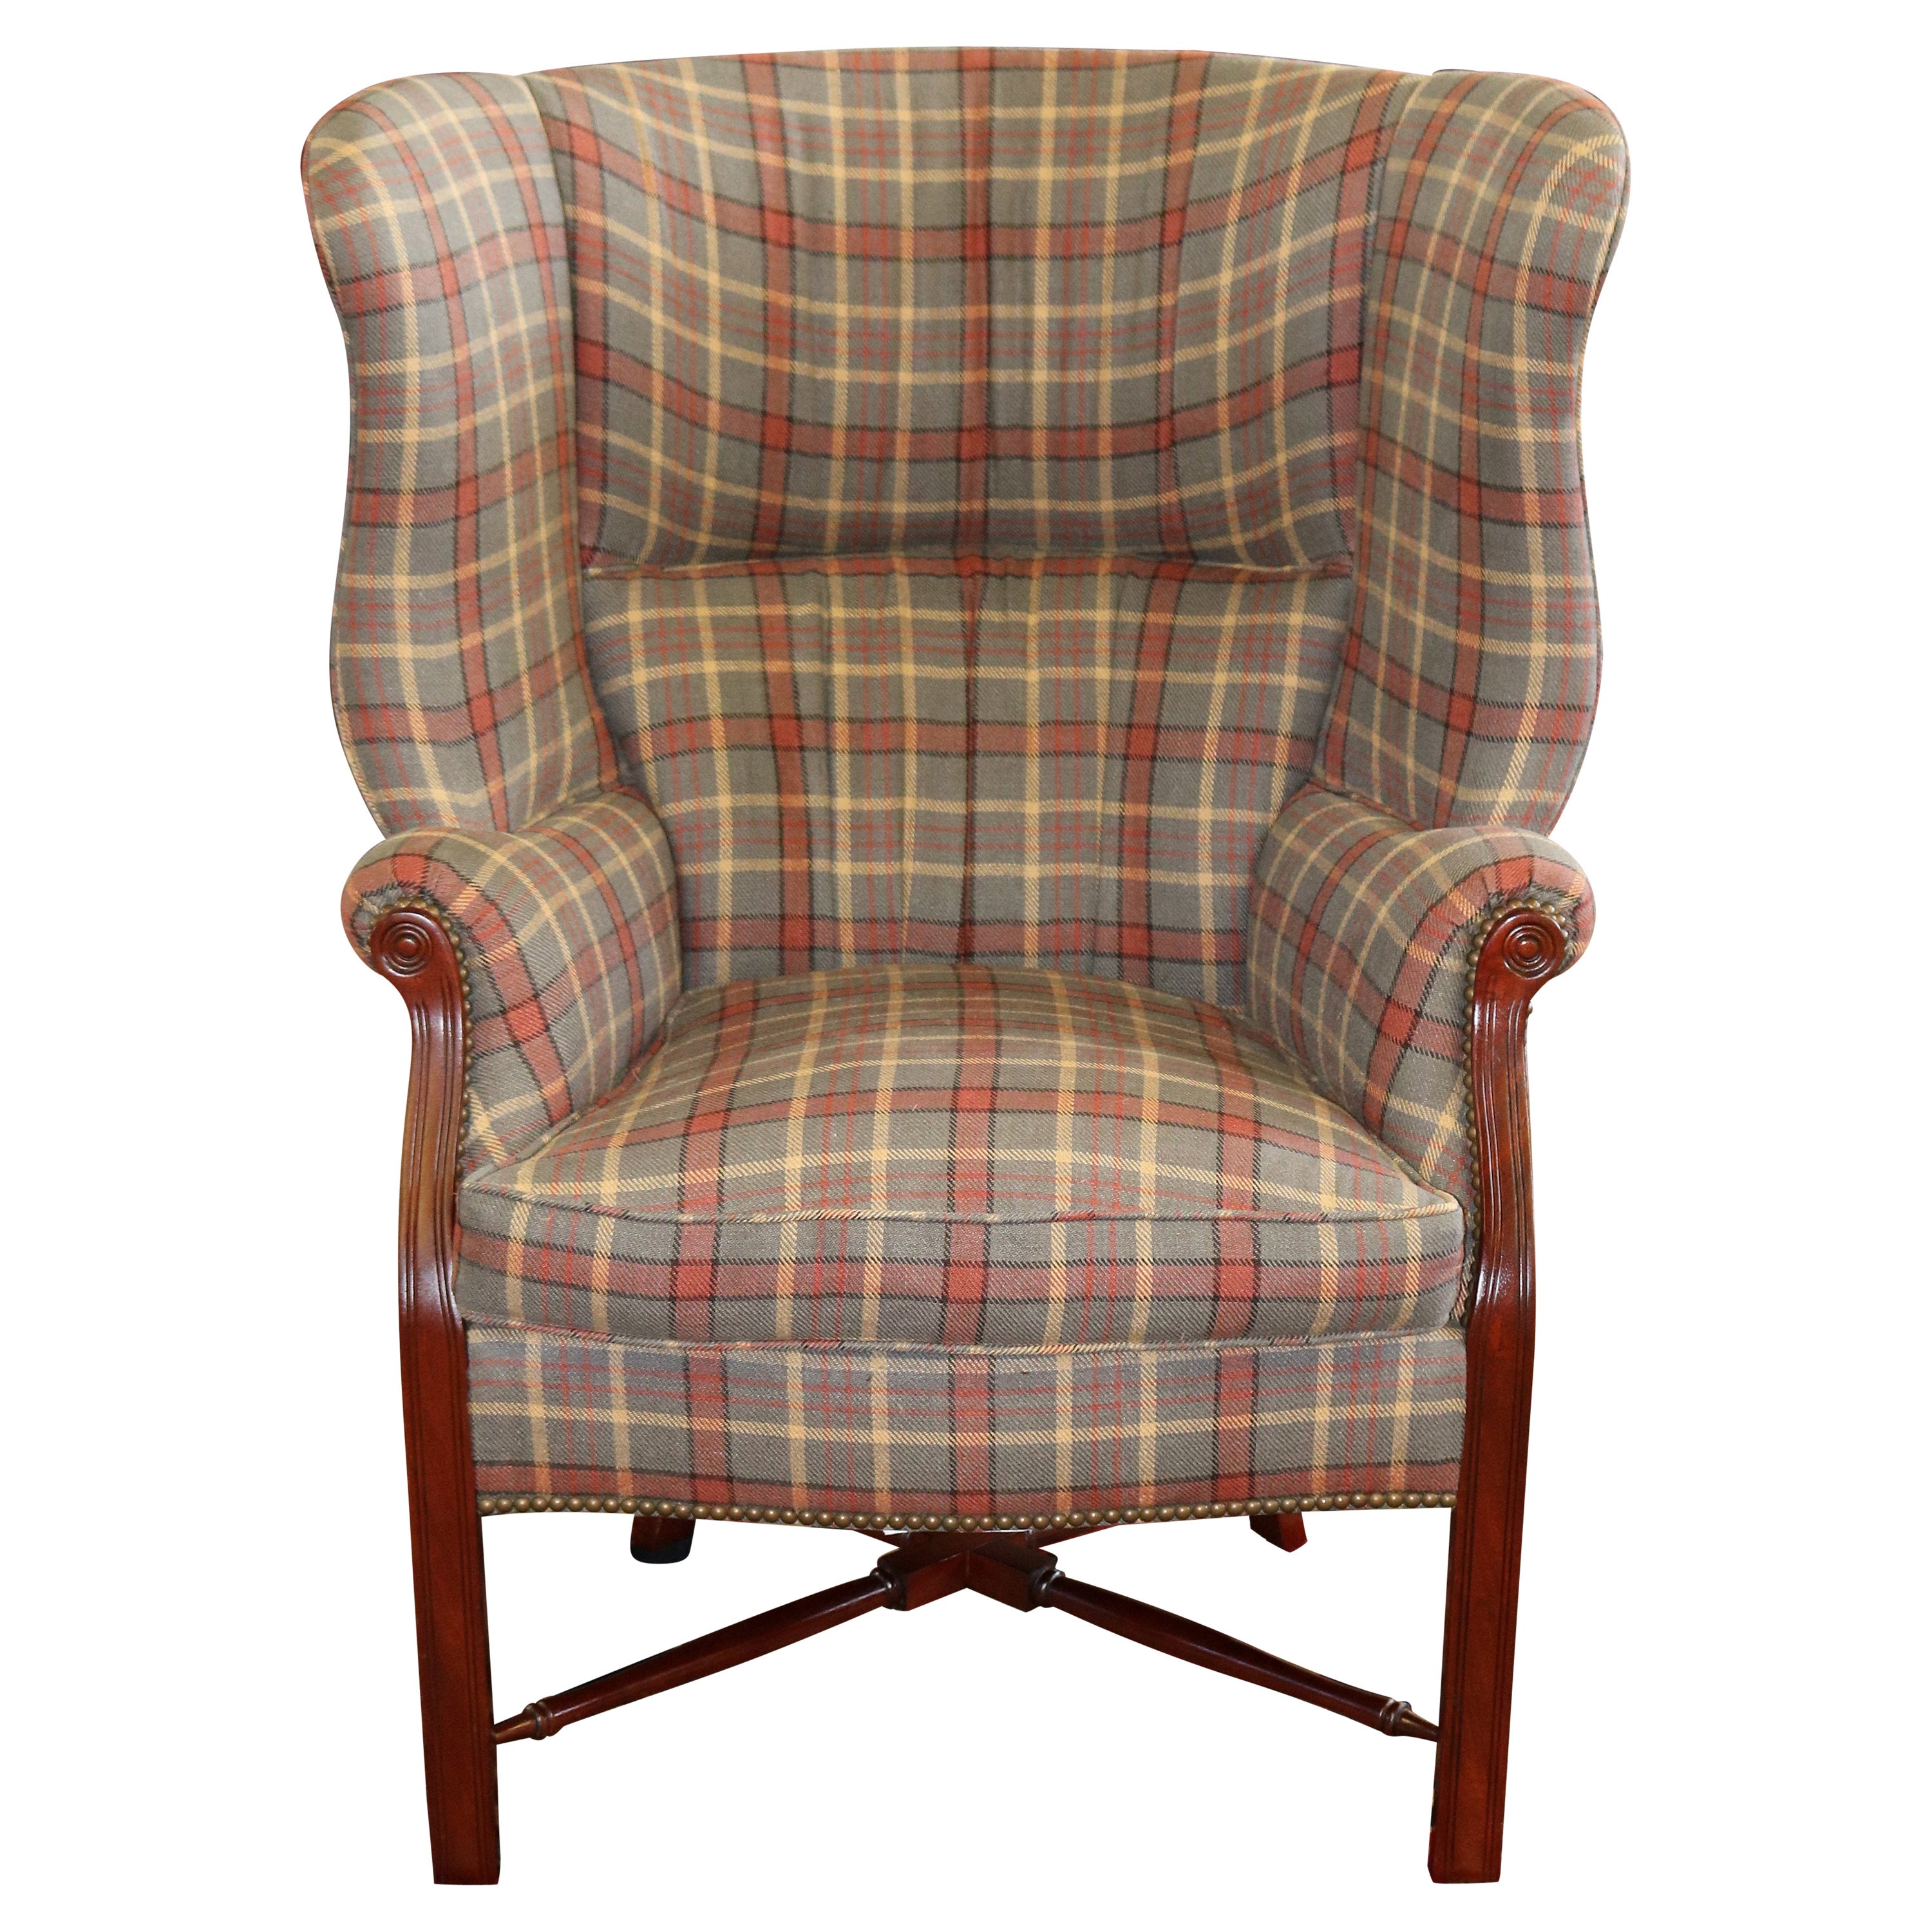 Theodore Alexander TRS Upholstery Mahogany Striped Fabric Fireside Wing Chair